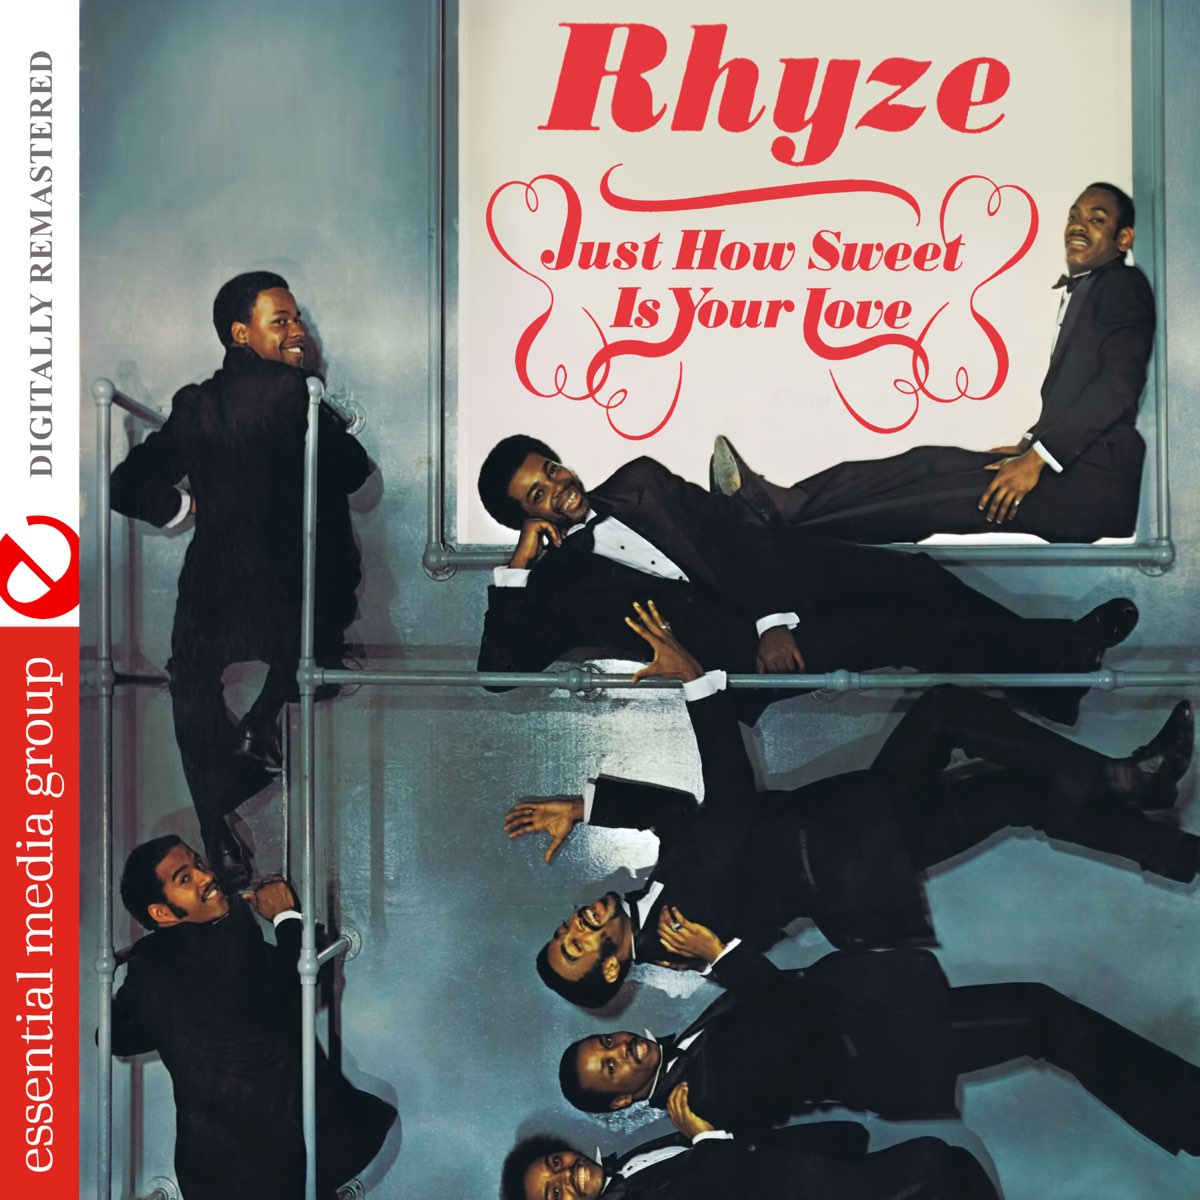 Rhyze - just how Sweet is your Love. Rhyze. Your Love (Remastered). Just r музыка. Do your dance